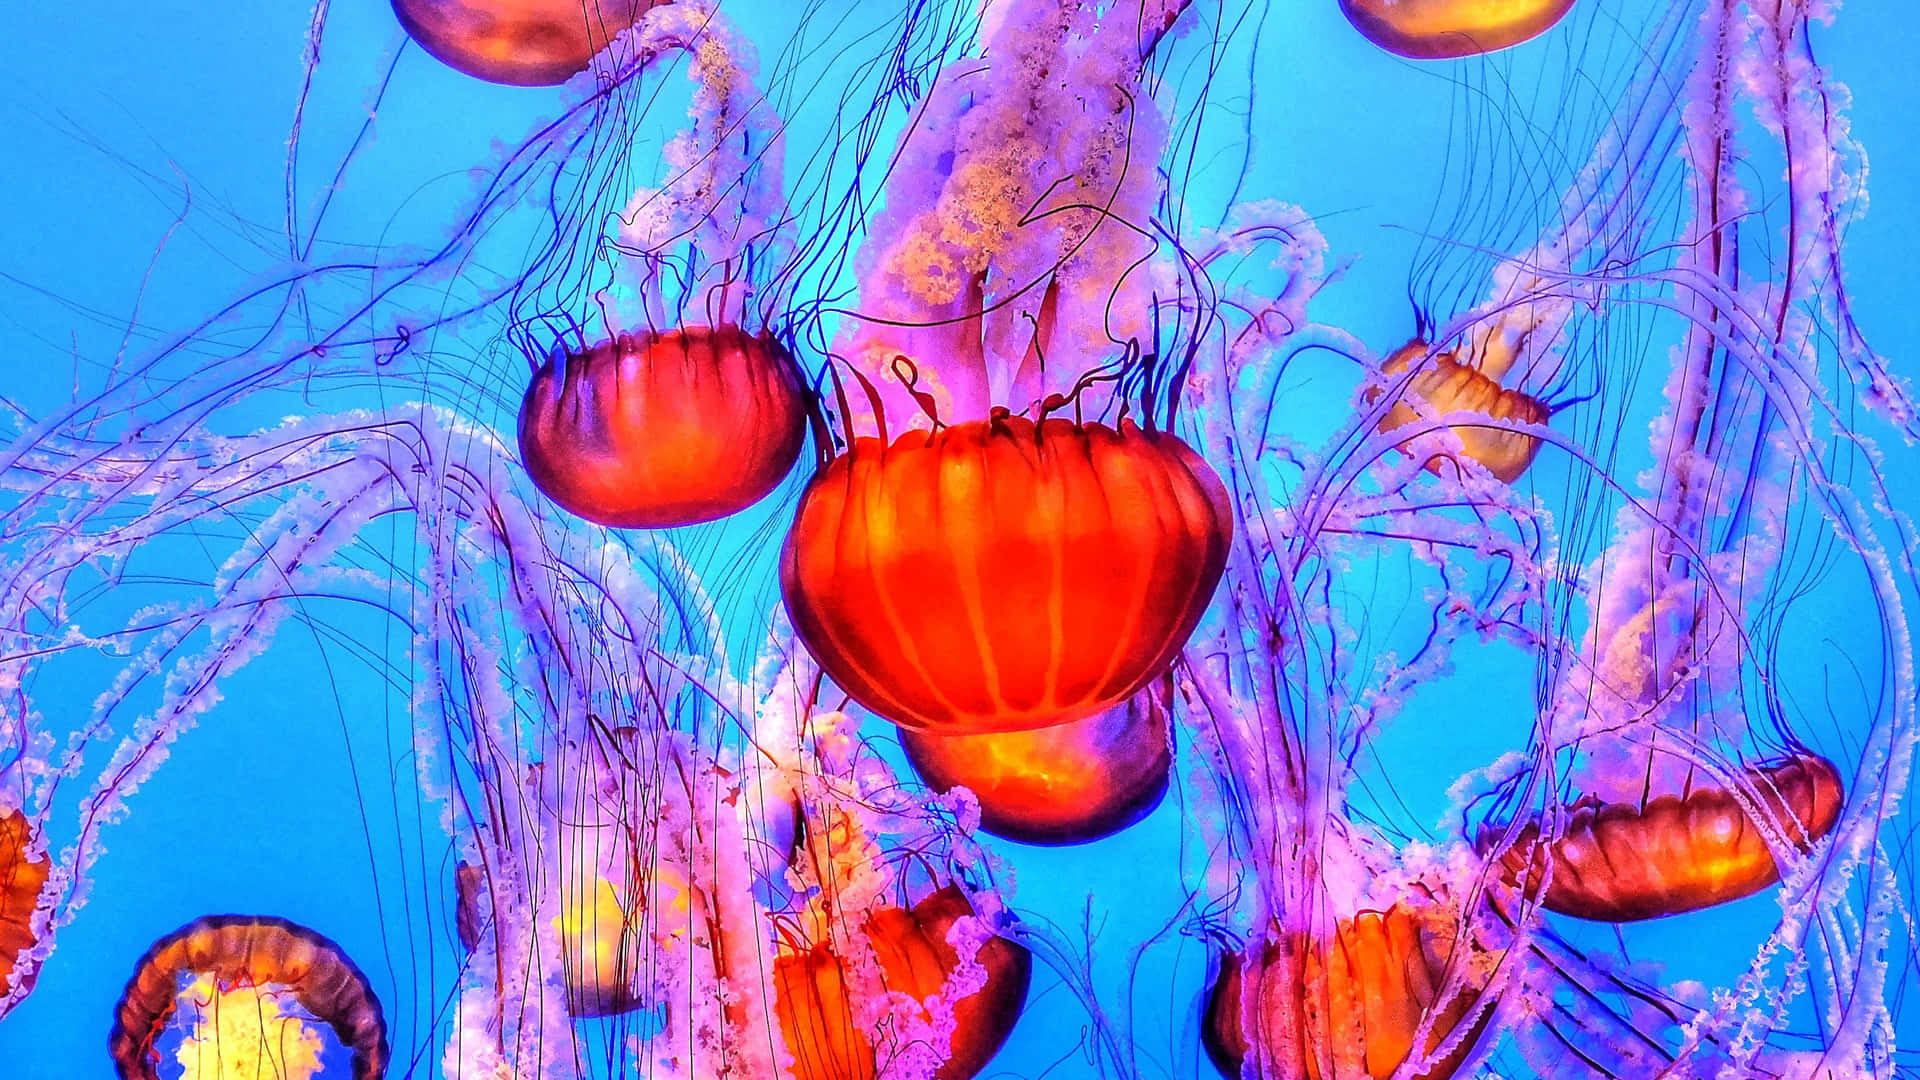 Soaring To New Depths With This 4k Jellyfish" Wallpaper